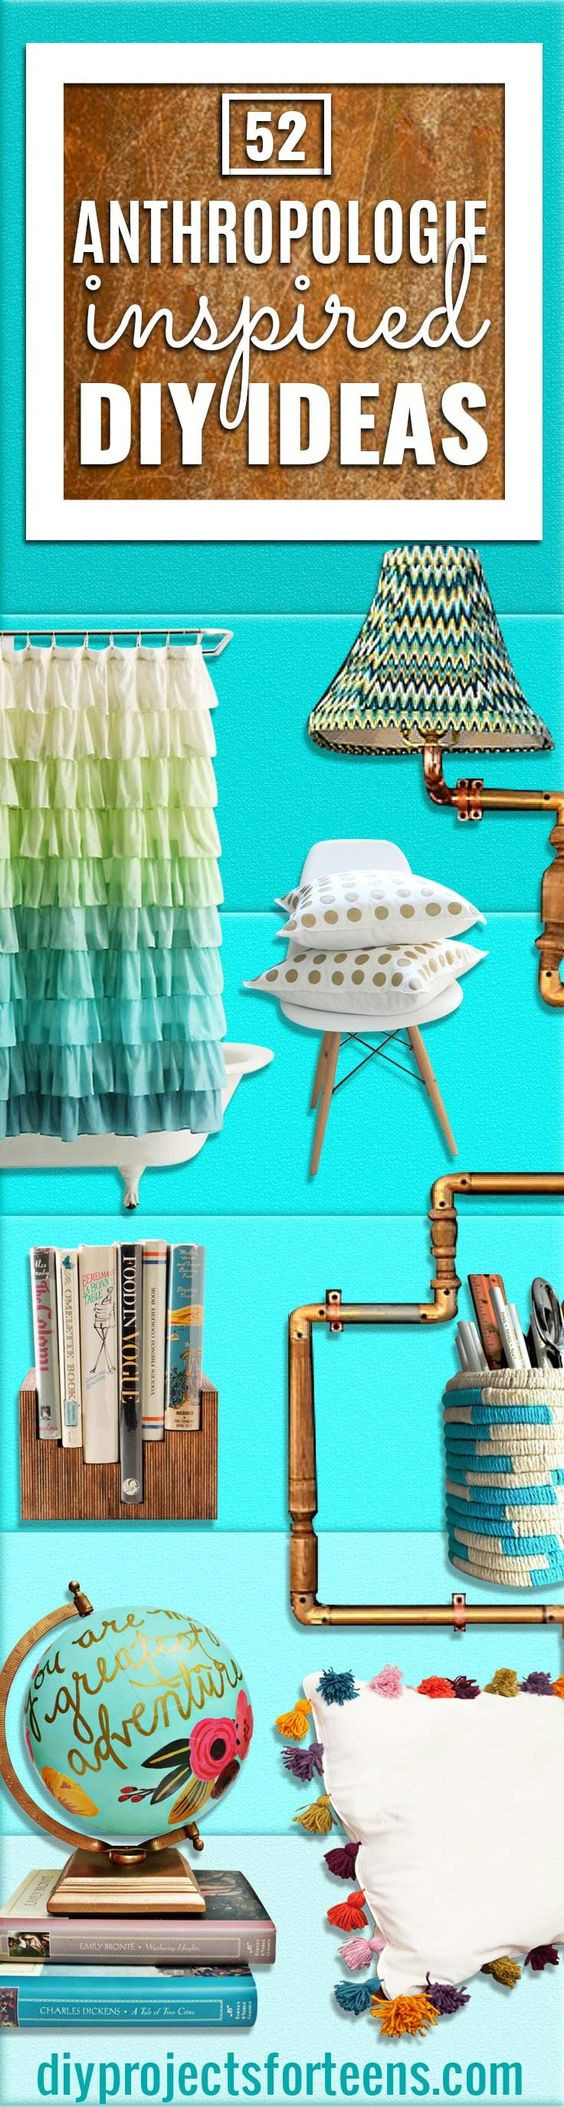 DIY Anthropologie Decor
 Cool ideas Sewing projects and Anthropologie on Pinterest